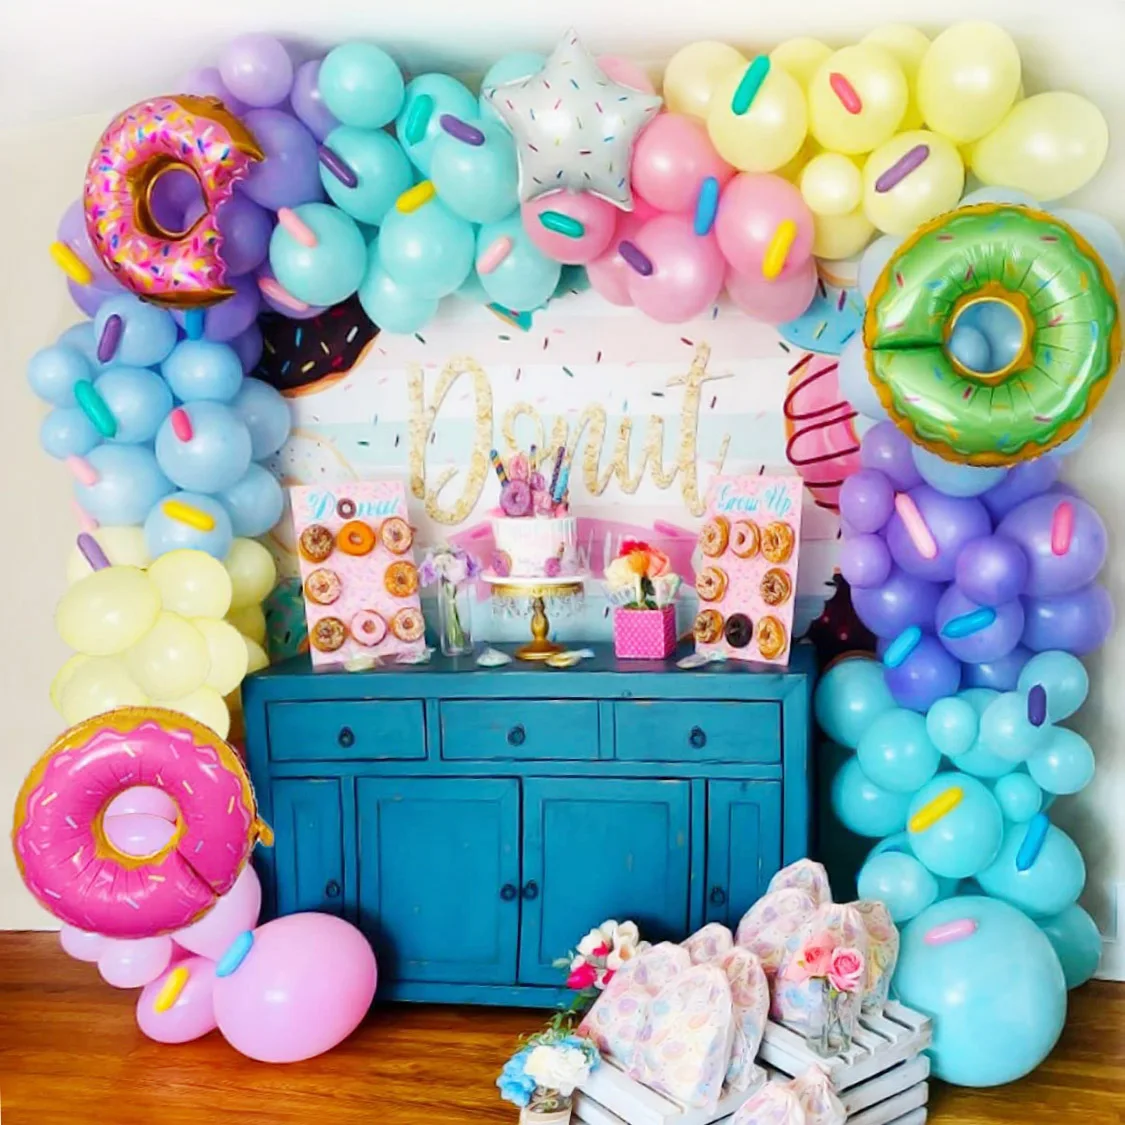 

169Pcs/set Donut Macaron Balloons Garland Arch Pastel Candy Ballons Helium Globos for Baby Shower Birthday Ice Cream Party Decor